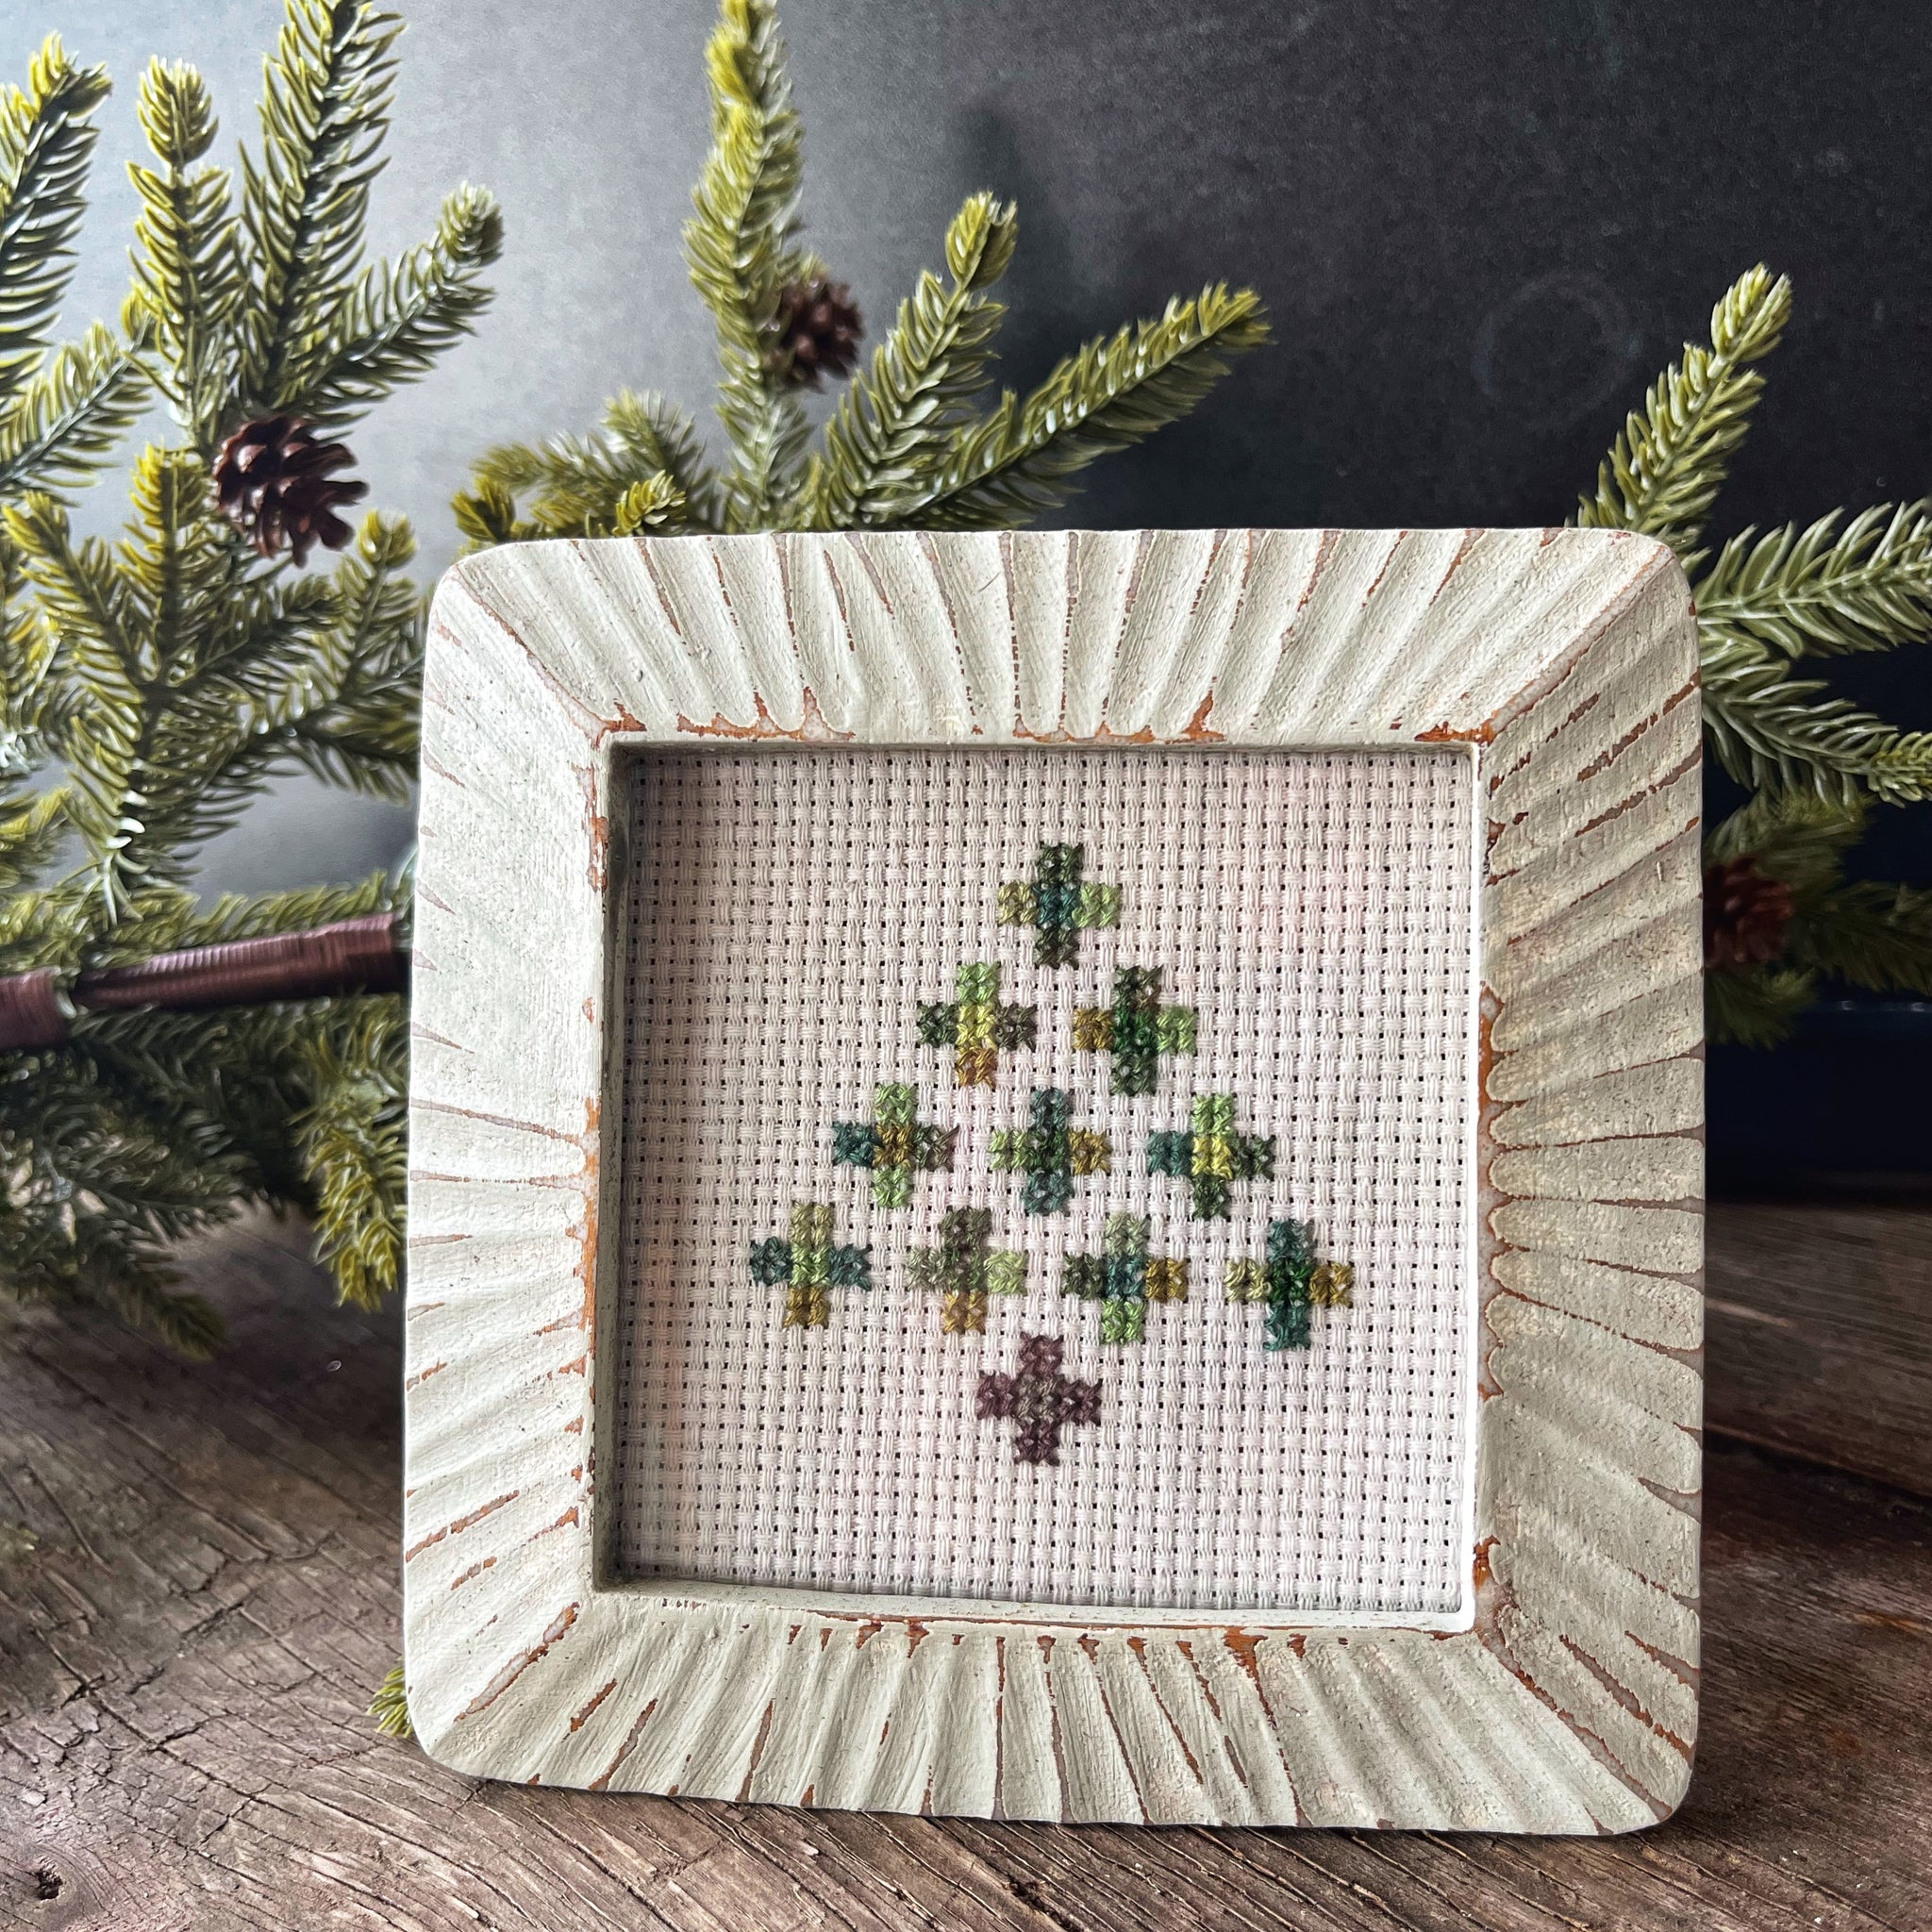 Swiss Christmas Crossstich Embroidery Kit